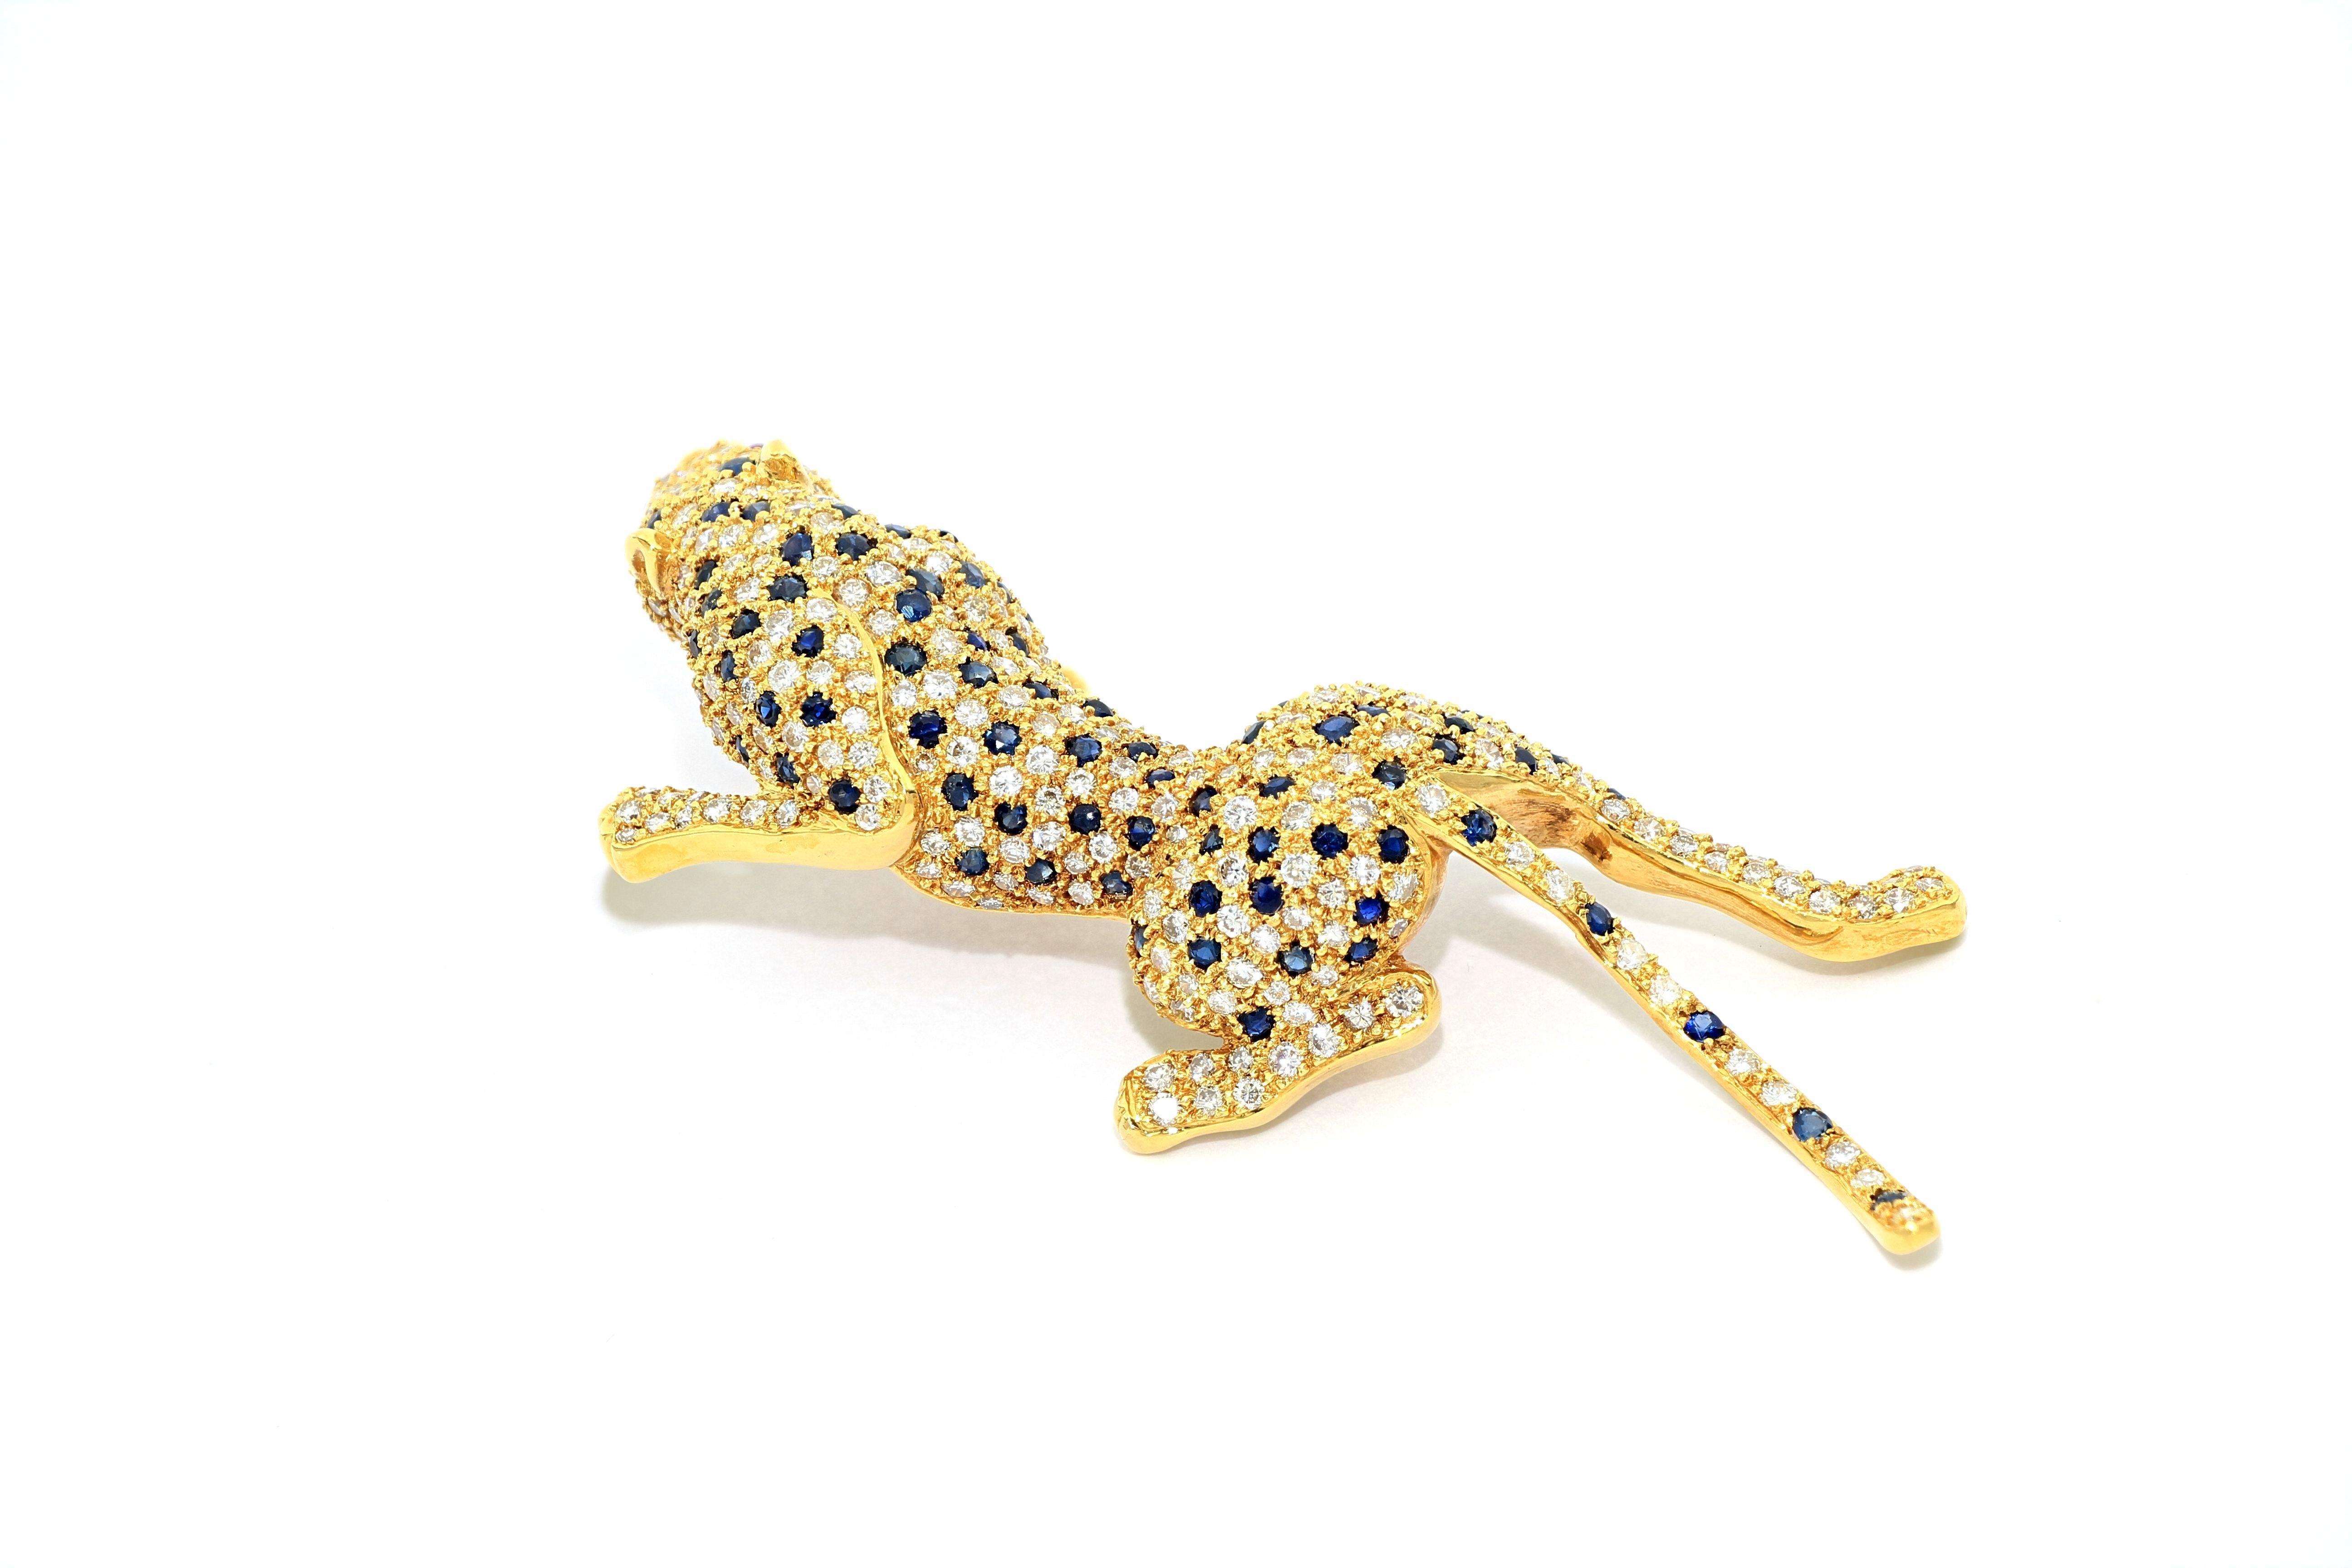 Contemporary 18K Gold Diamond Panther Brooch with Sapphires and Rubies  For Sale